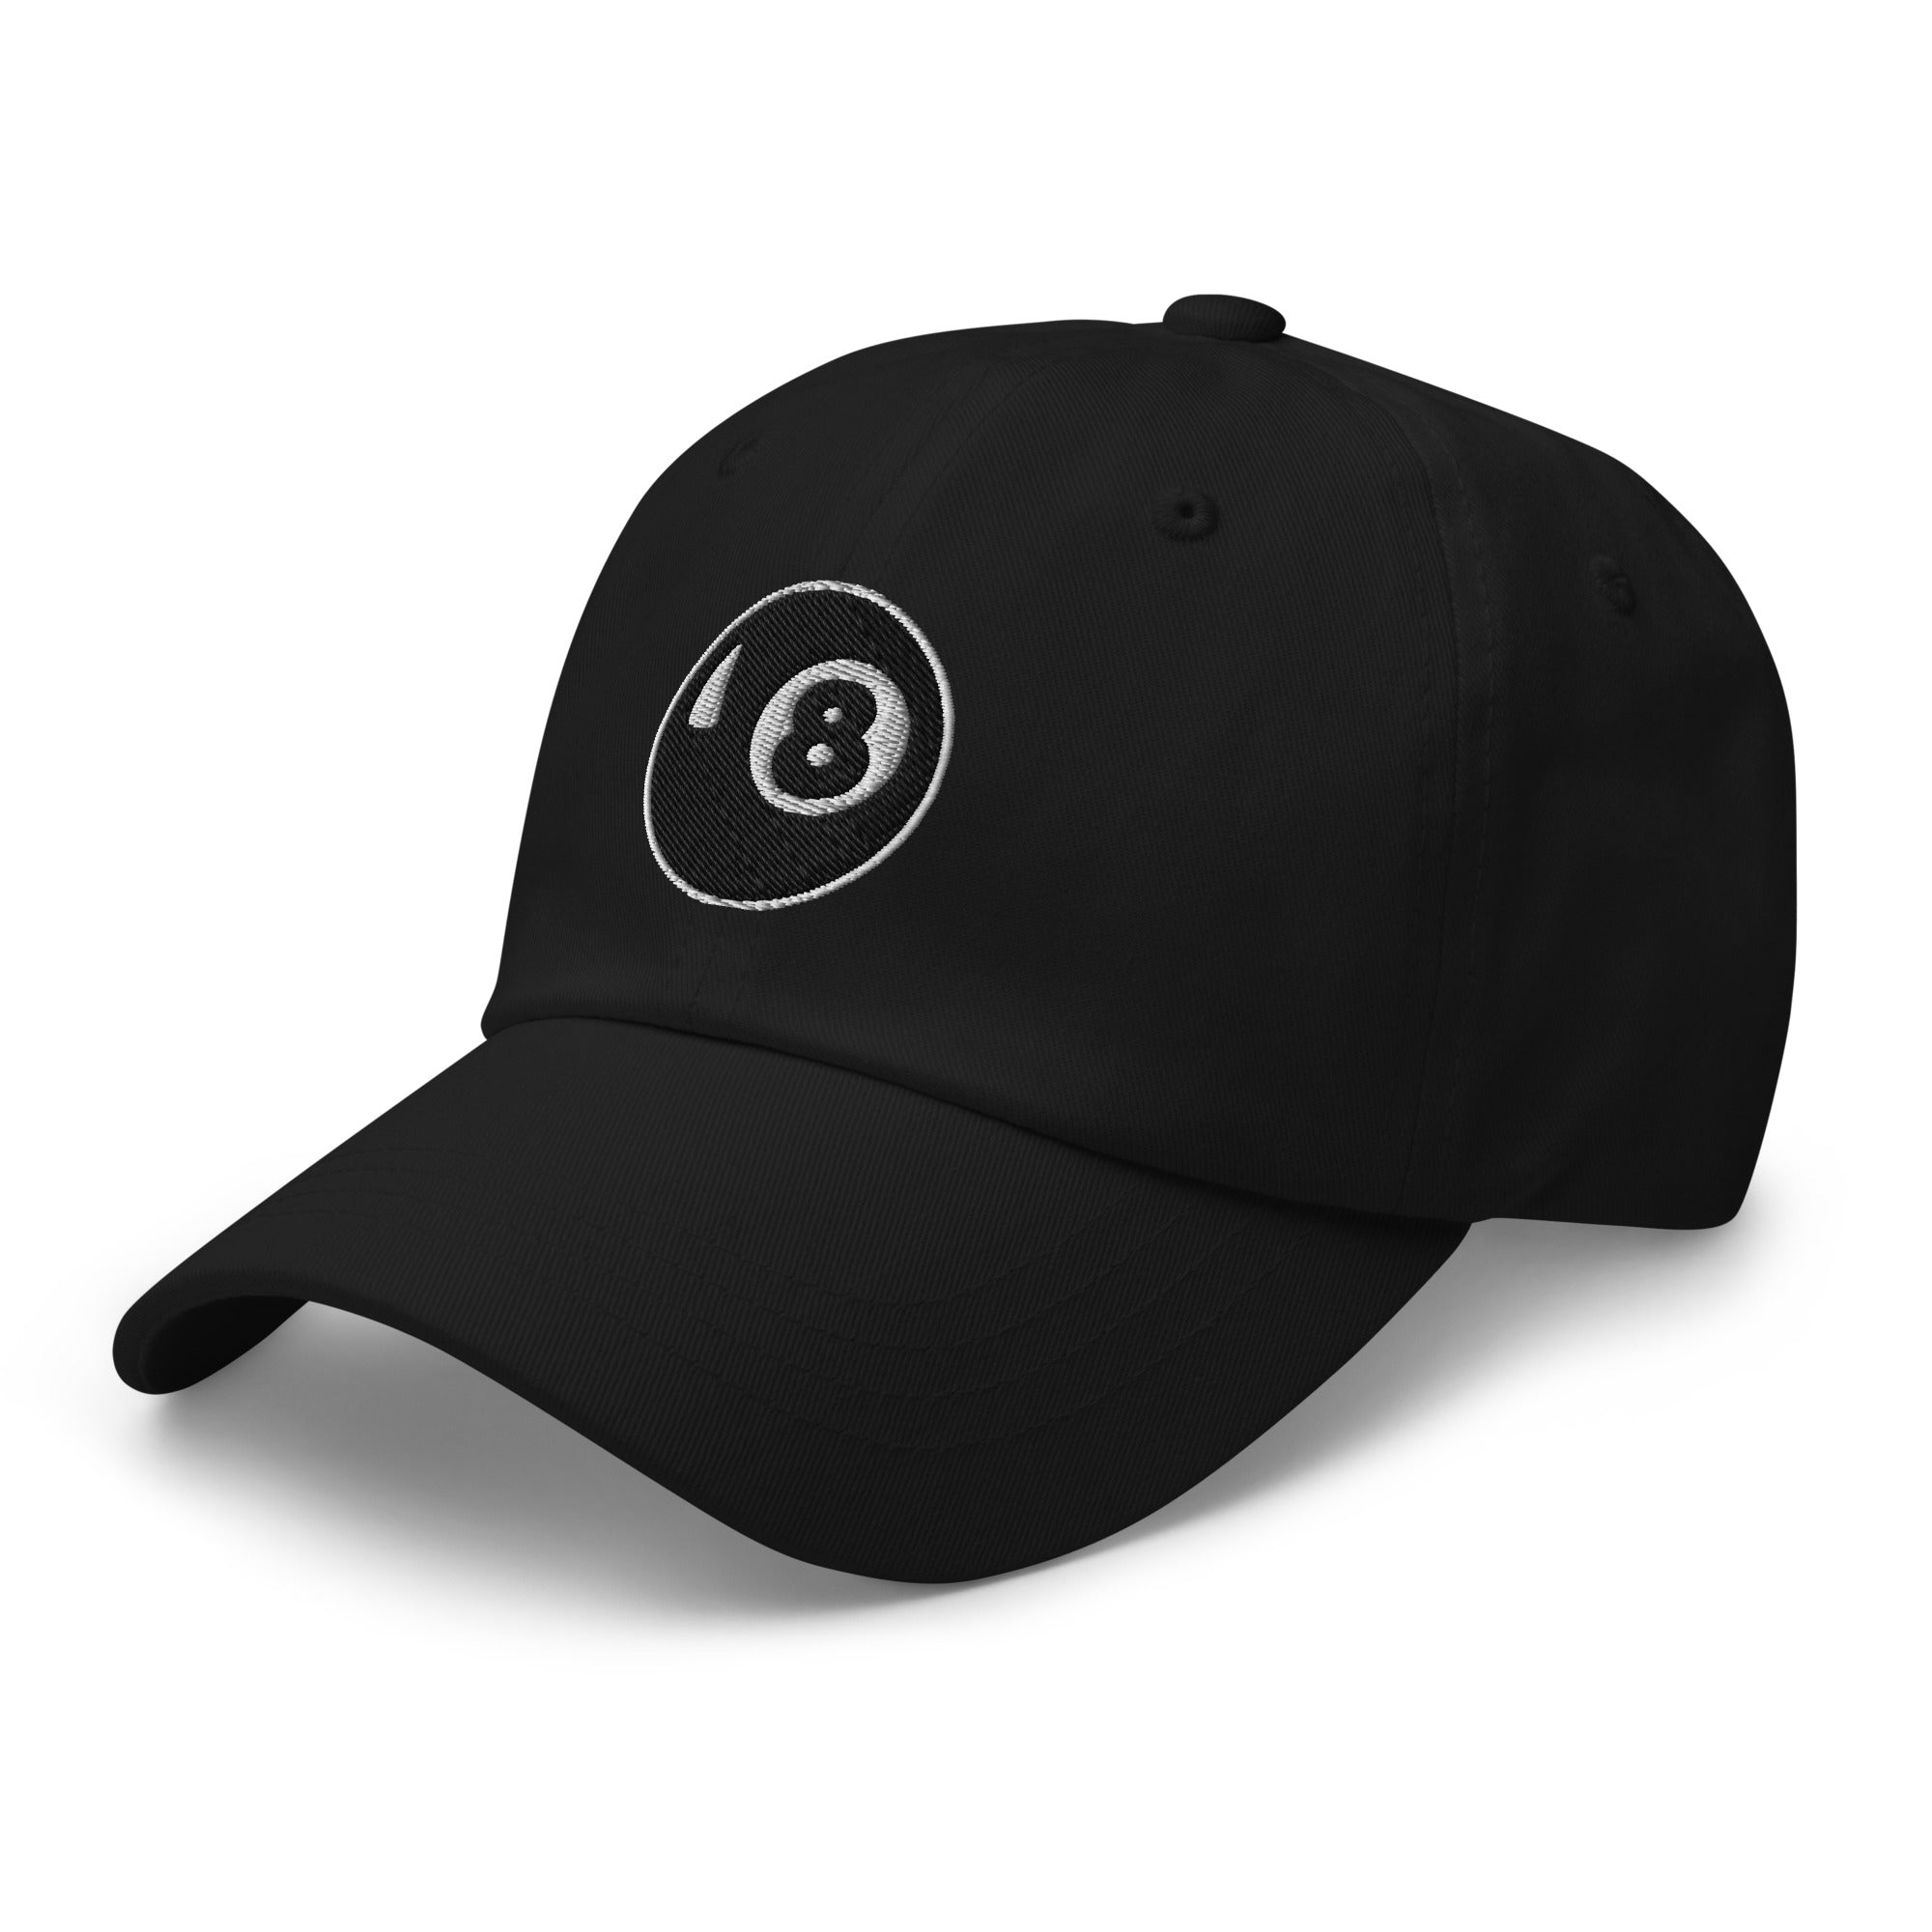 8 Ball Pool Billiards Embroidered Baseball Cap Dad hat - Edge of Life Designs